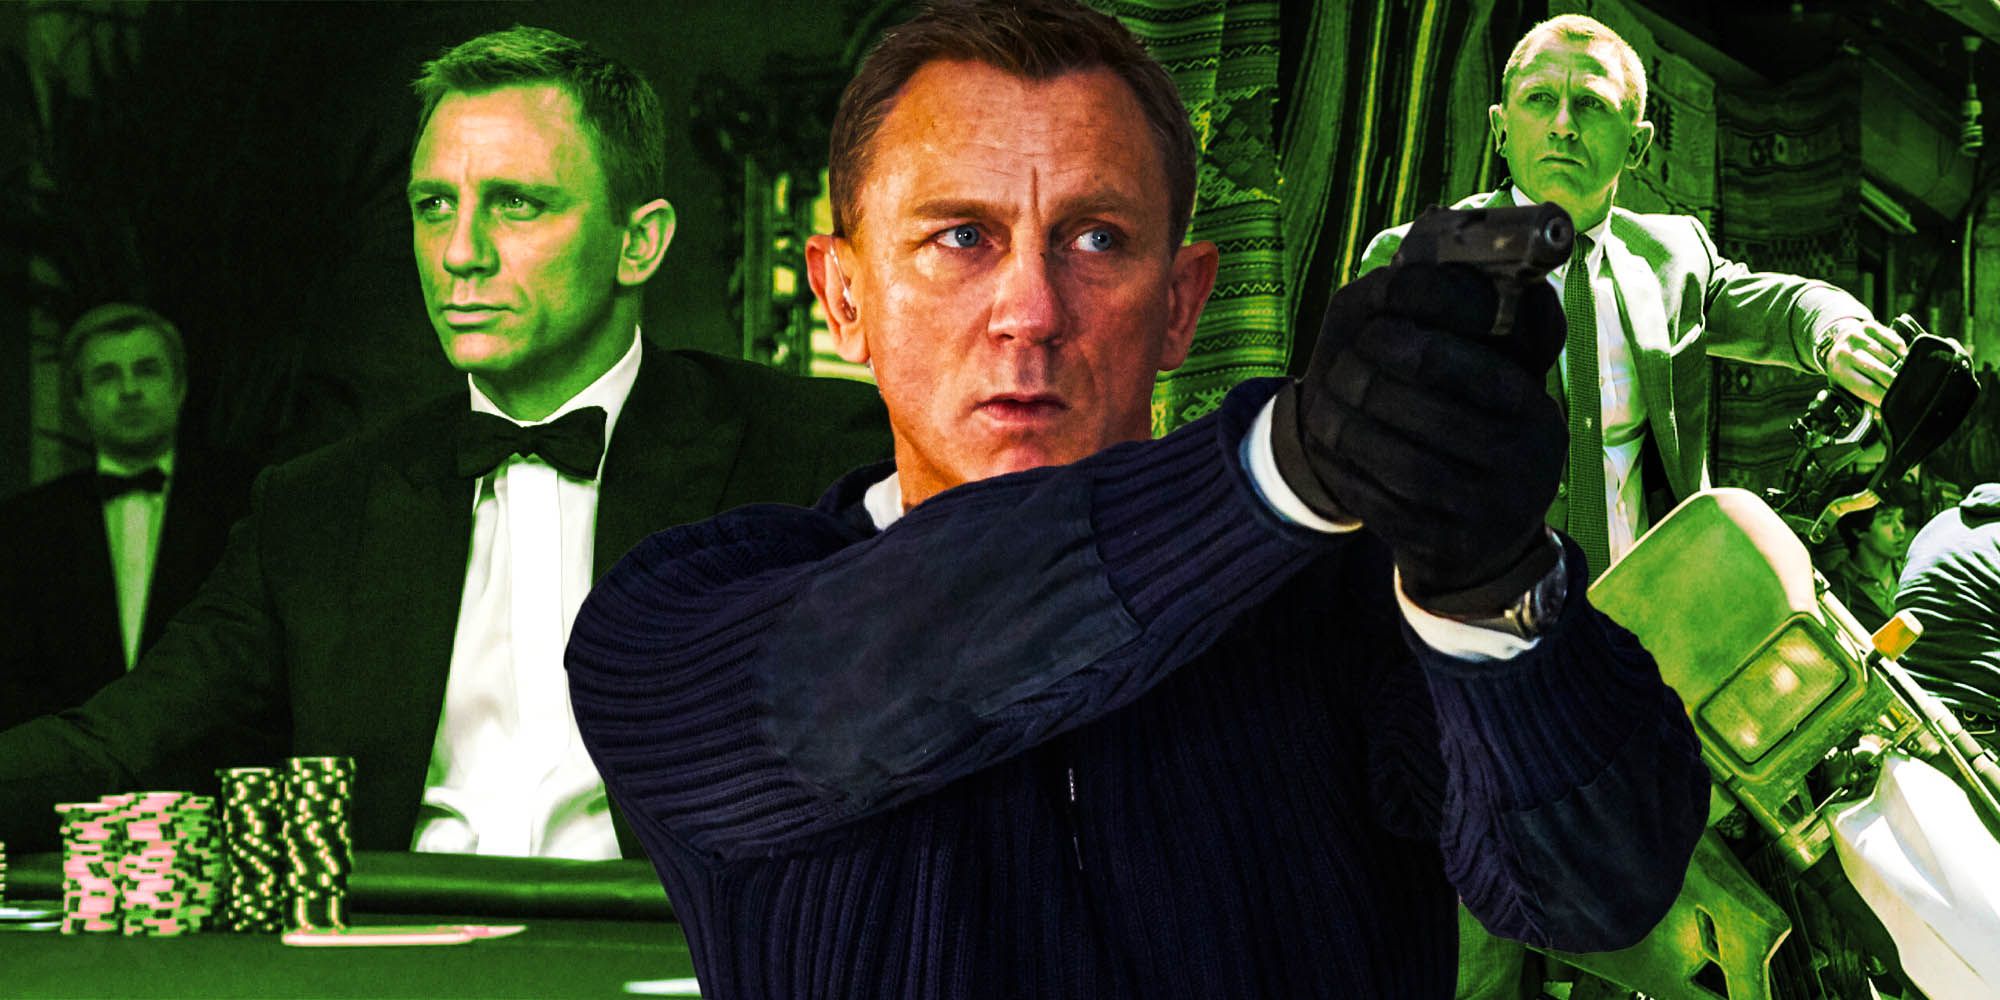 Daniel Craig Made The Perfect Bond Trilogy Just A Shame About The Others